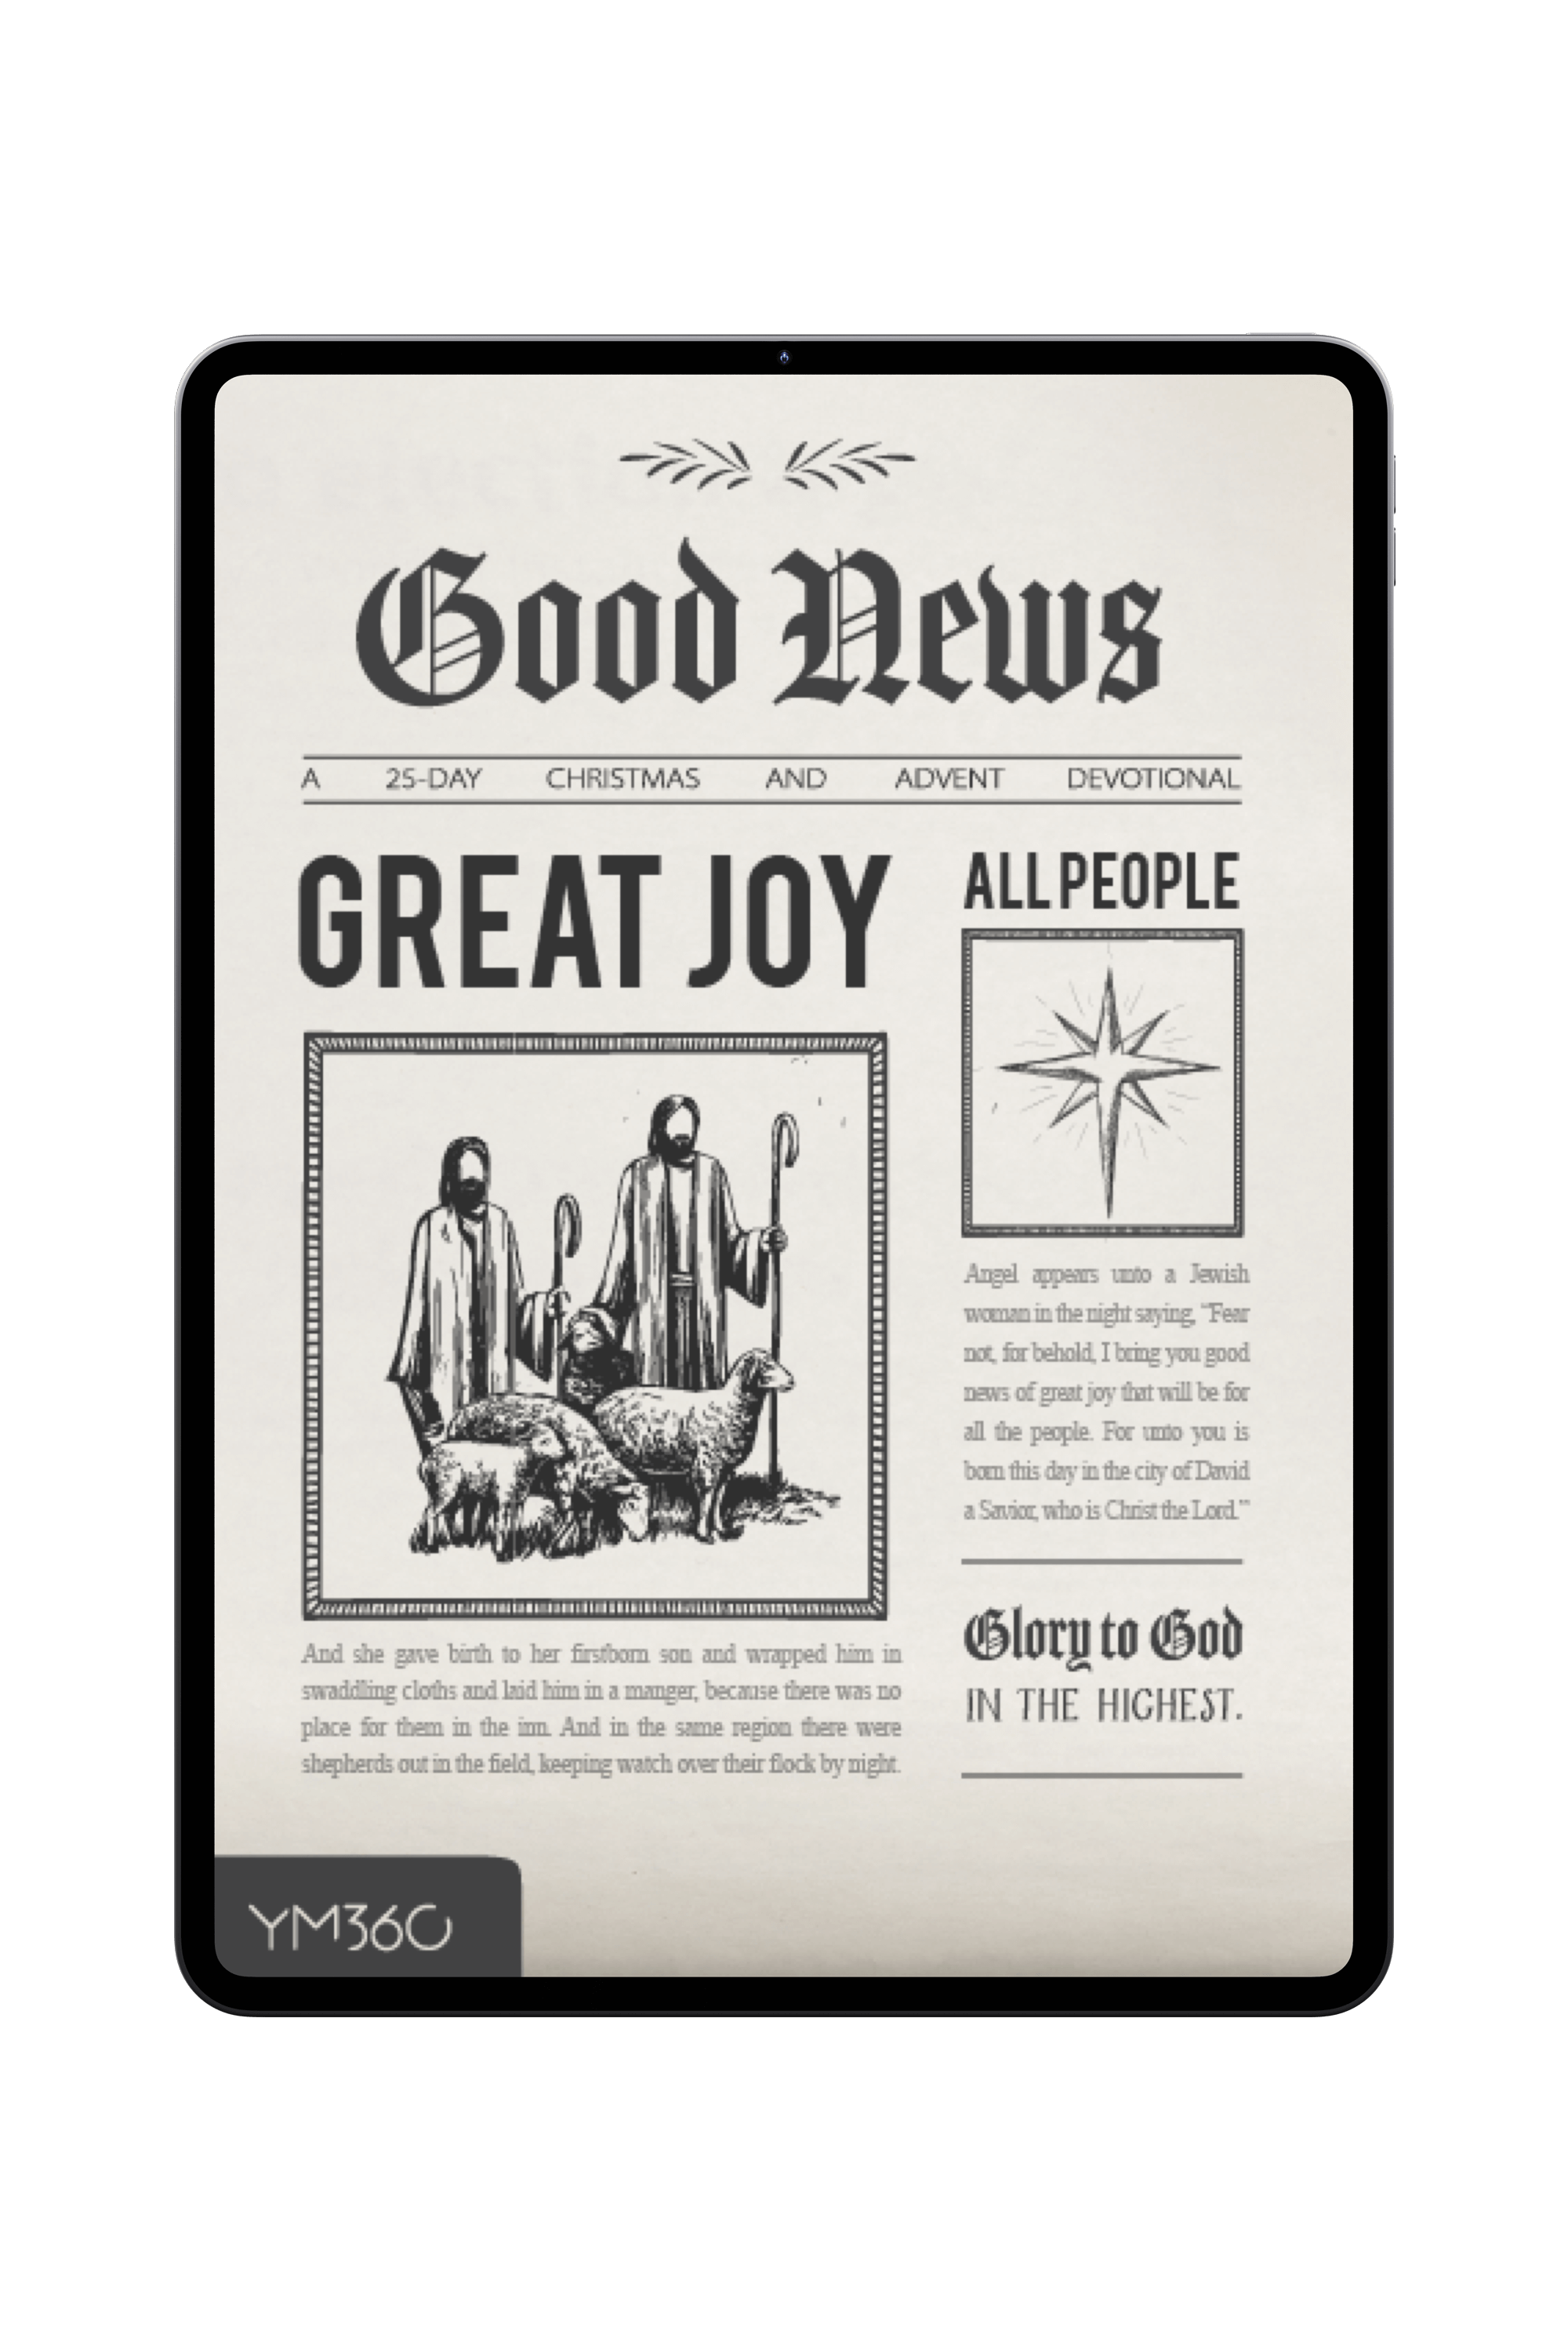 [DOWNLOADABLE VERSION] Good News, Great Joy, All People: A 25-Day Christmas and Advent Devotional